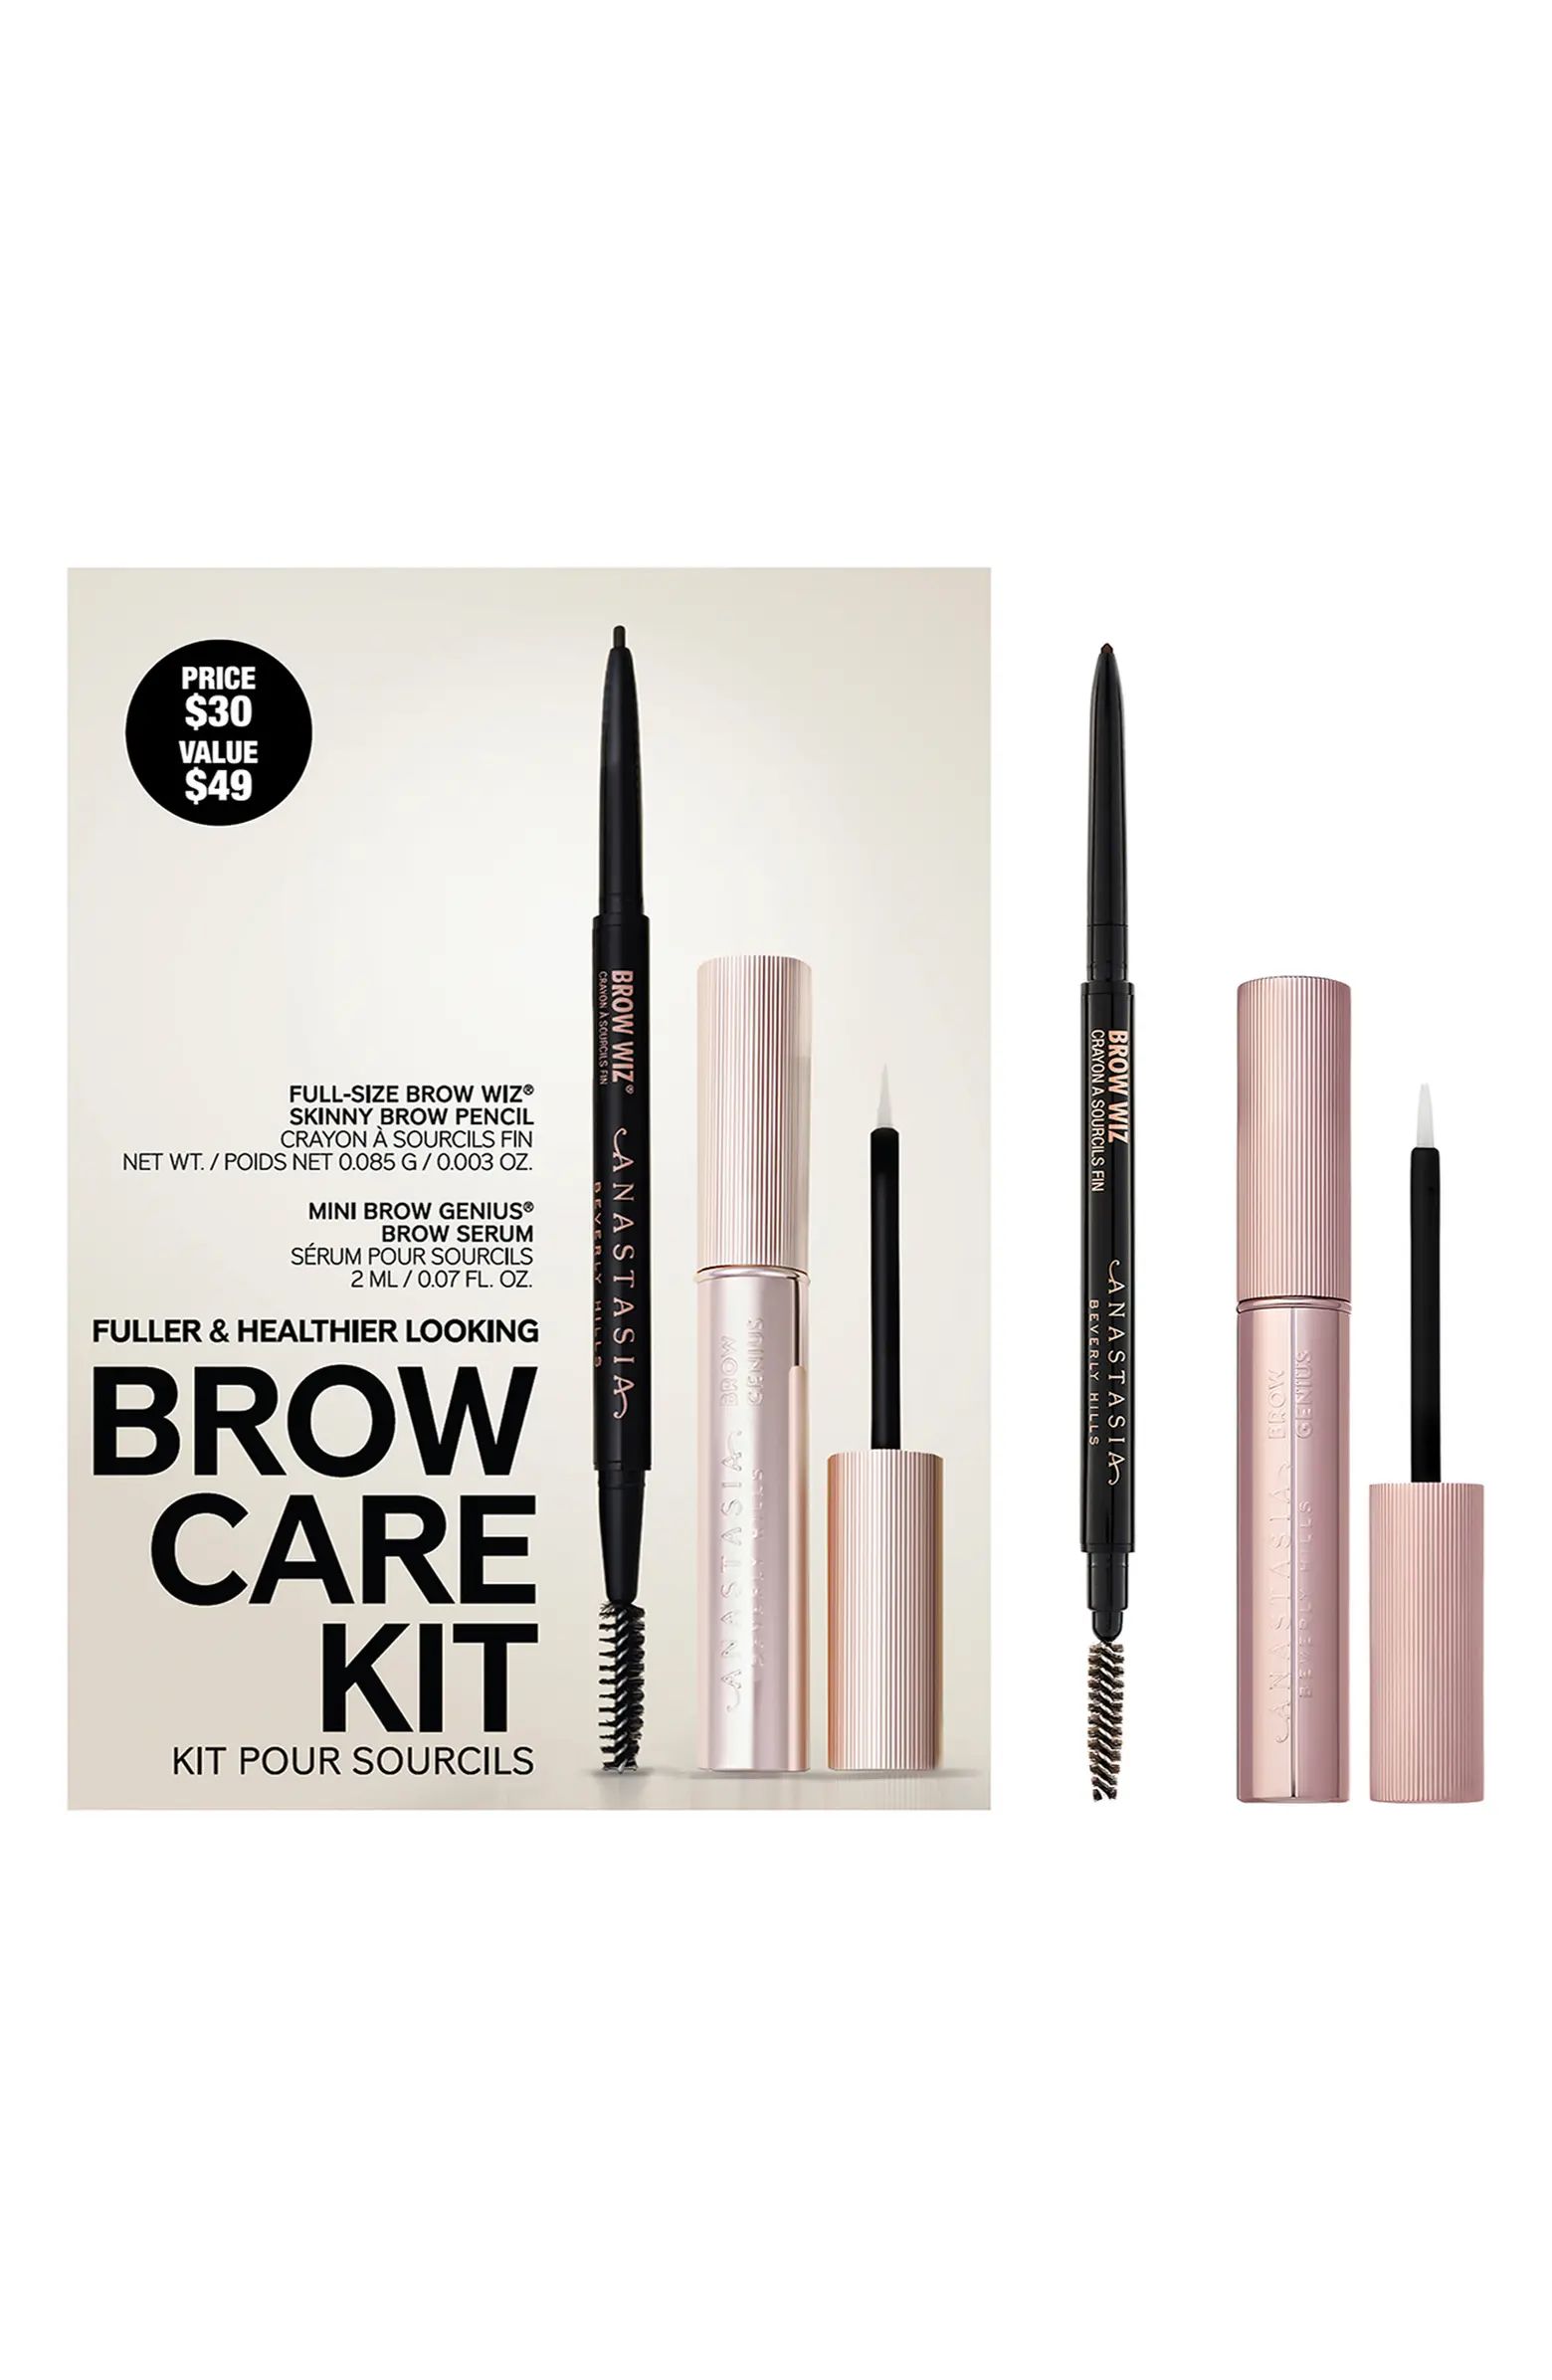 Brow Care Kit (Nordstrom Exclusive) $49 Value | Nordstrom